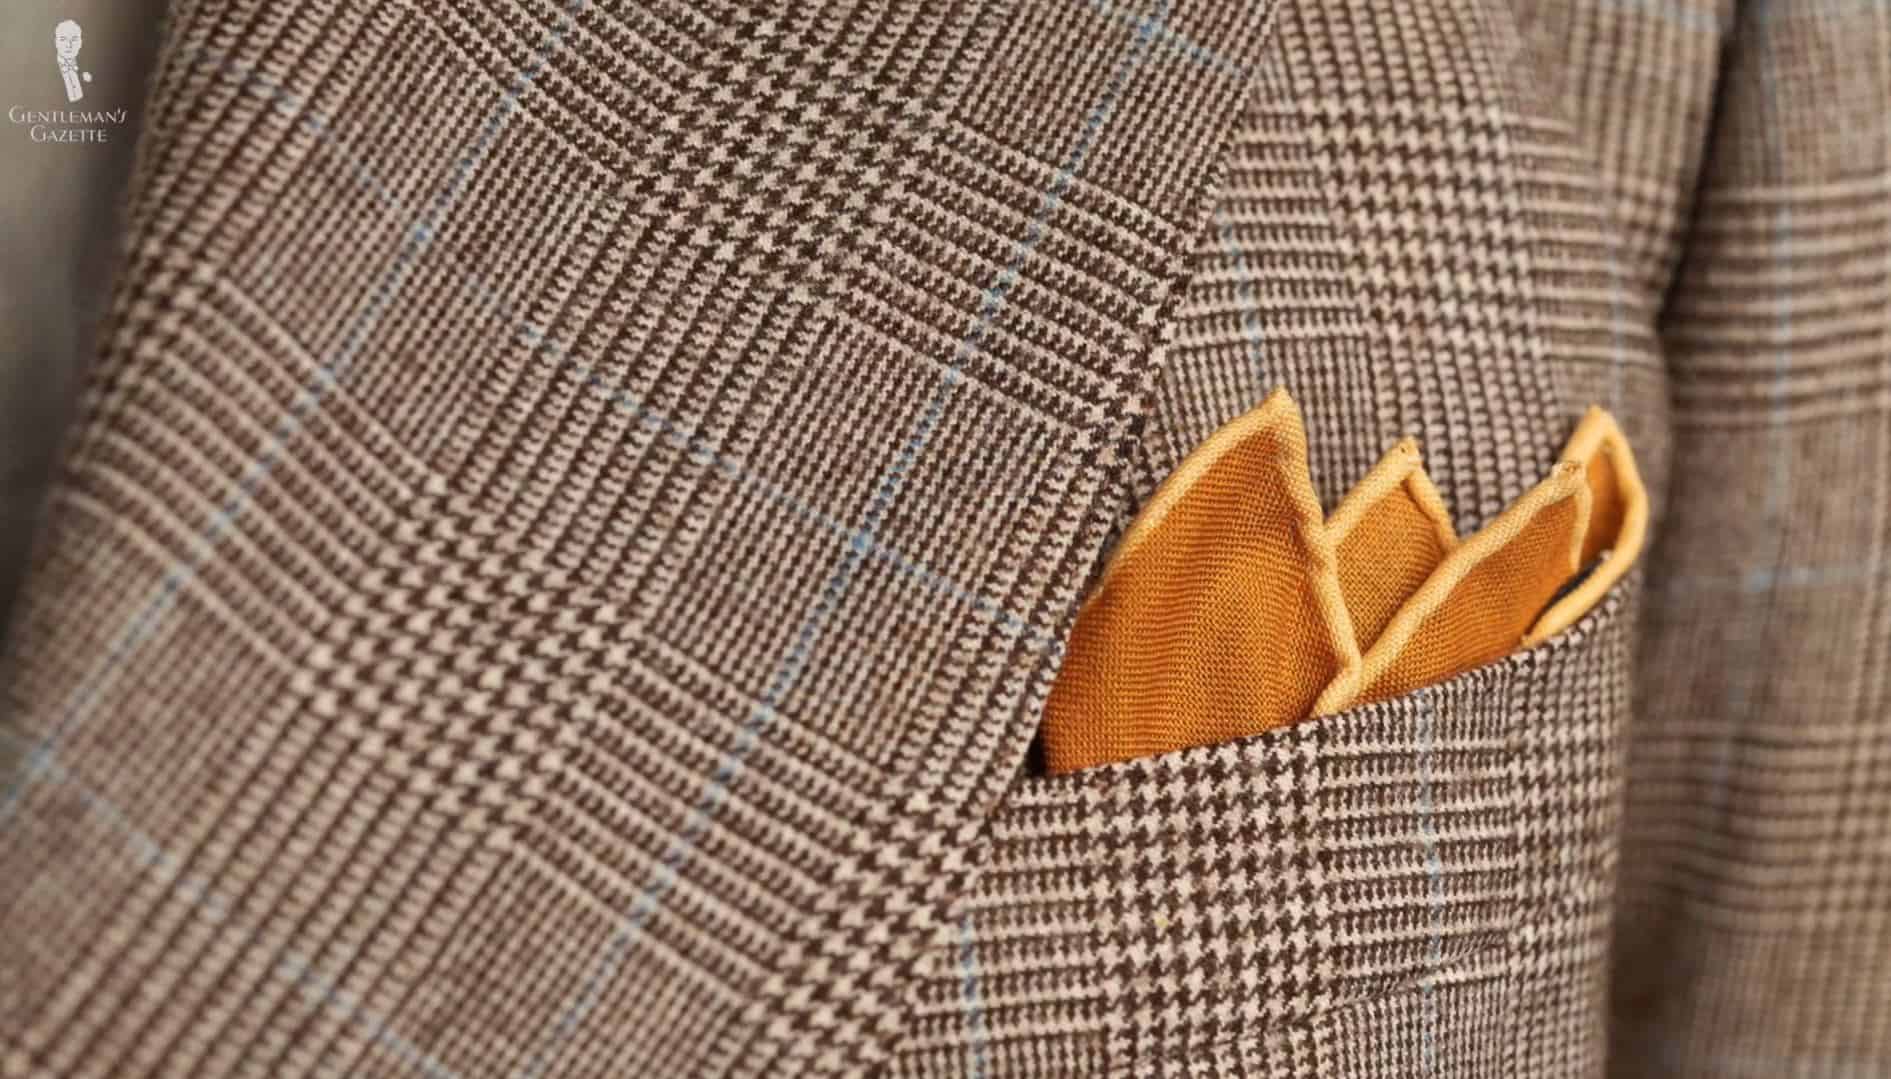 You may opt to show only the edges of a pocket square when paired with a bold-patterned jacket (Pictured: Antique Gold Yellow Silk Wool Pocket Square from Fort Belvedere)